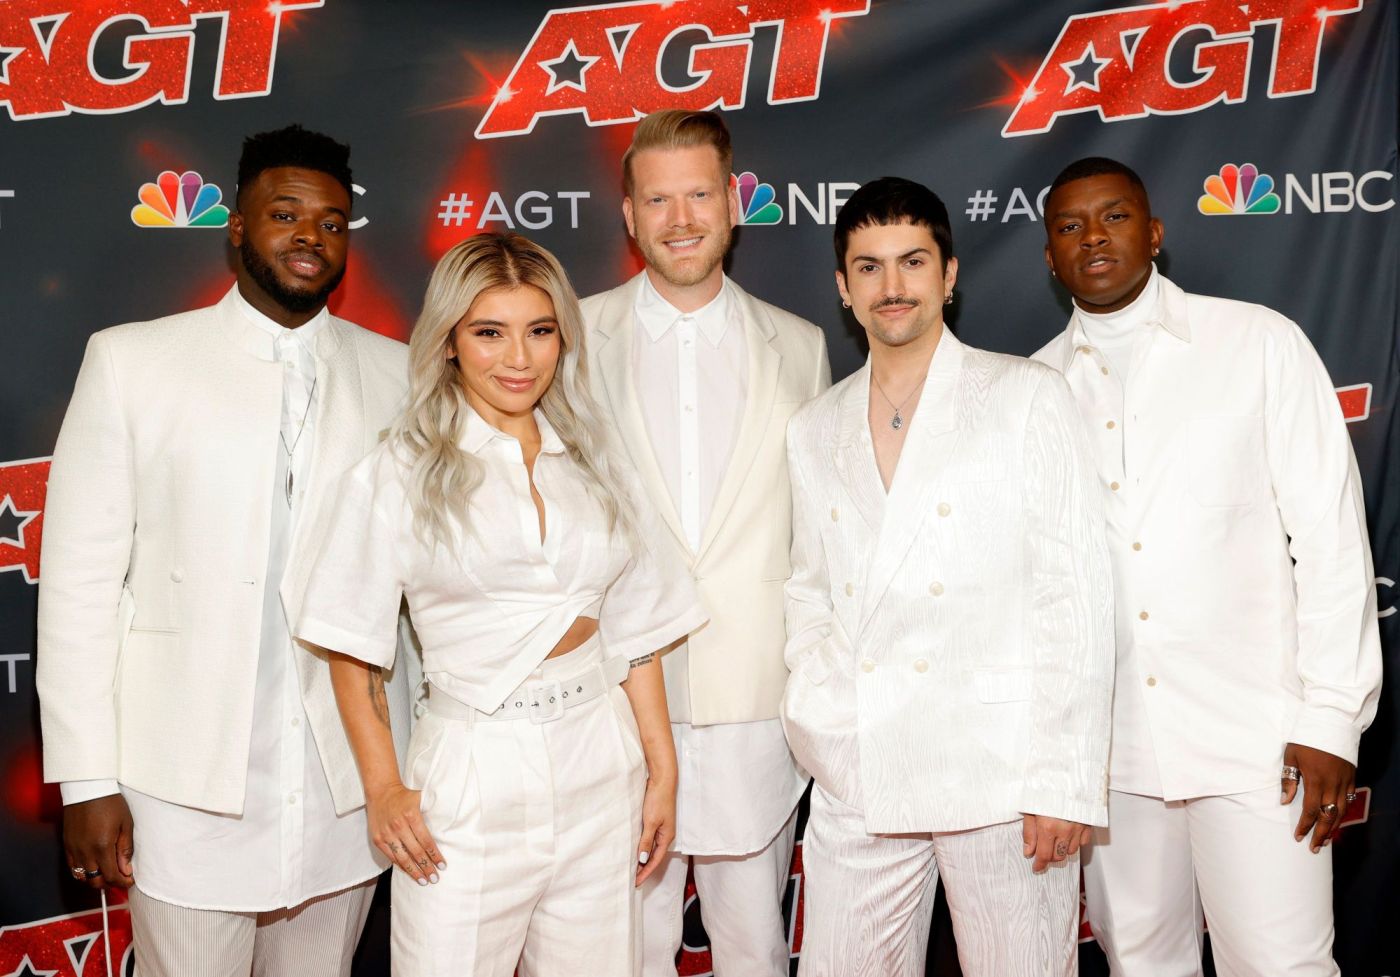 Pentatonix adds a stop at FivePoint Amphitheatre in Irvine to its World